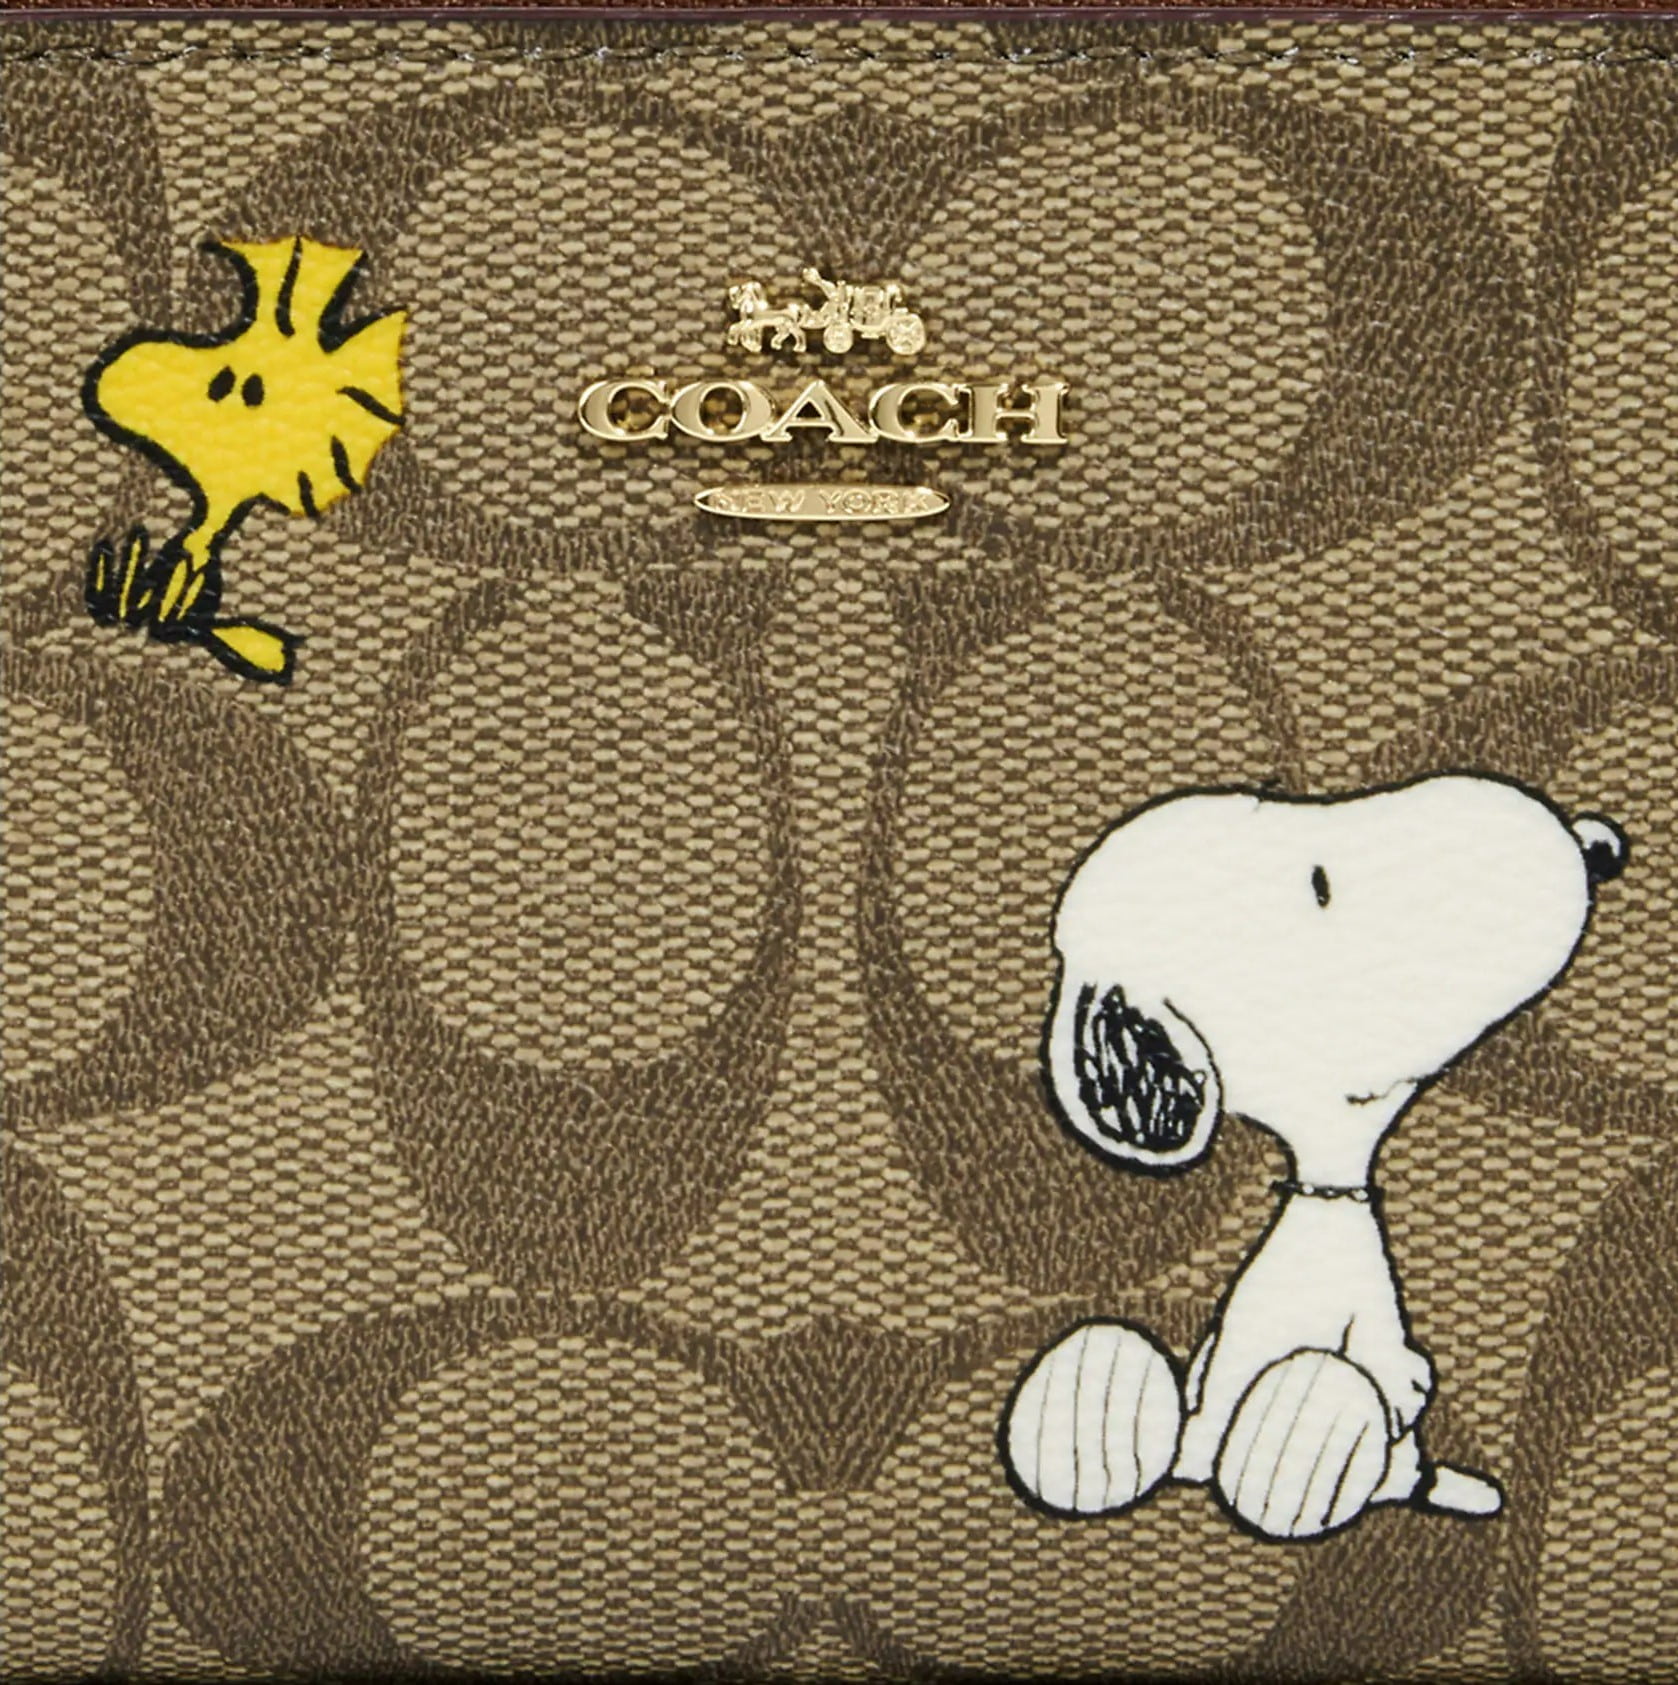 VÍ NỮ NGẮN CẦM TAY NÂU SÁNG COACH X PEANUTS SMALL ZIP AROUND WALLET IN SIGNATURE CANVAS WITH SNOOPY PRESENTS PRINT 4